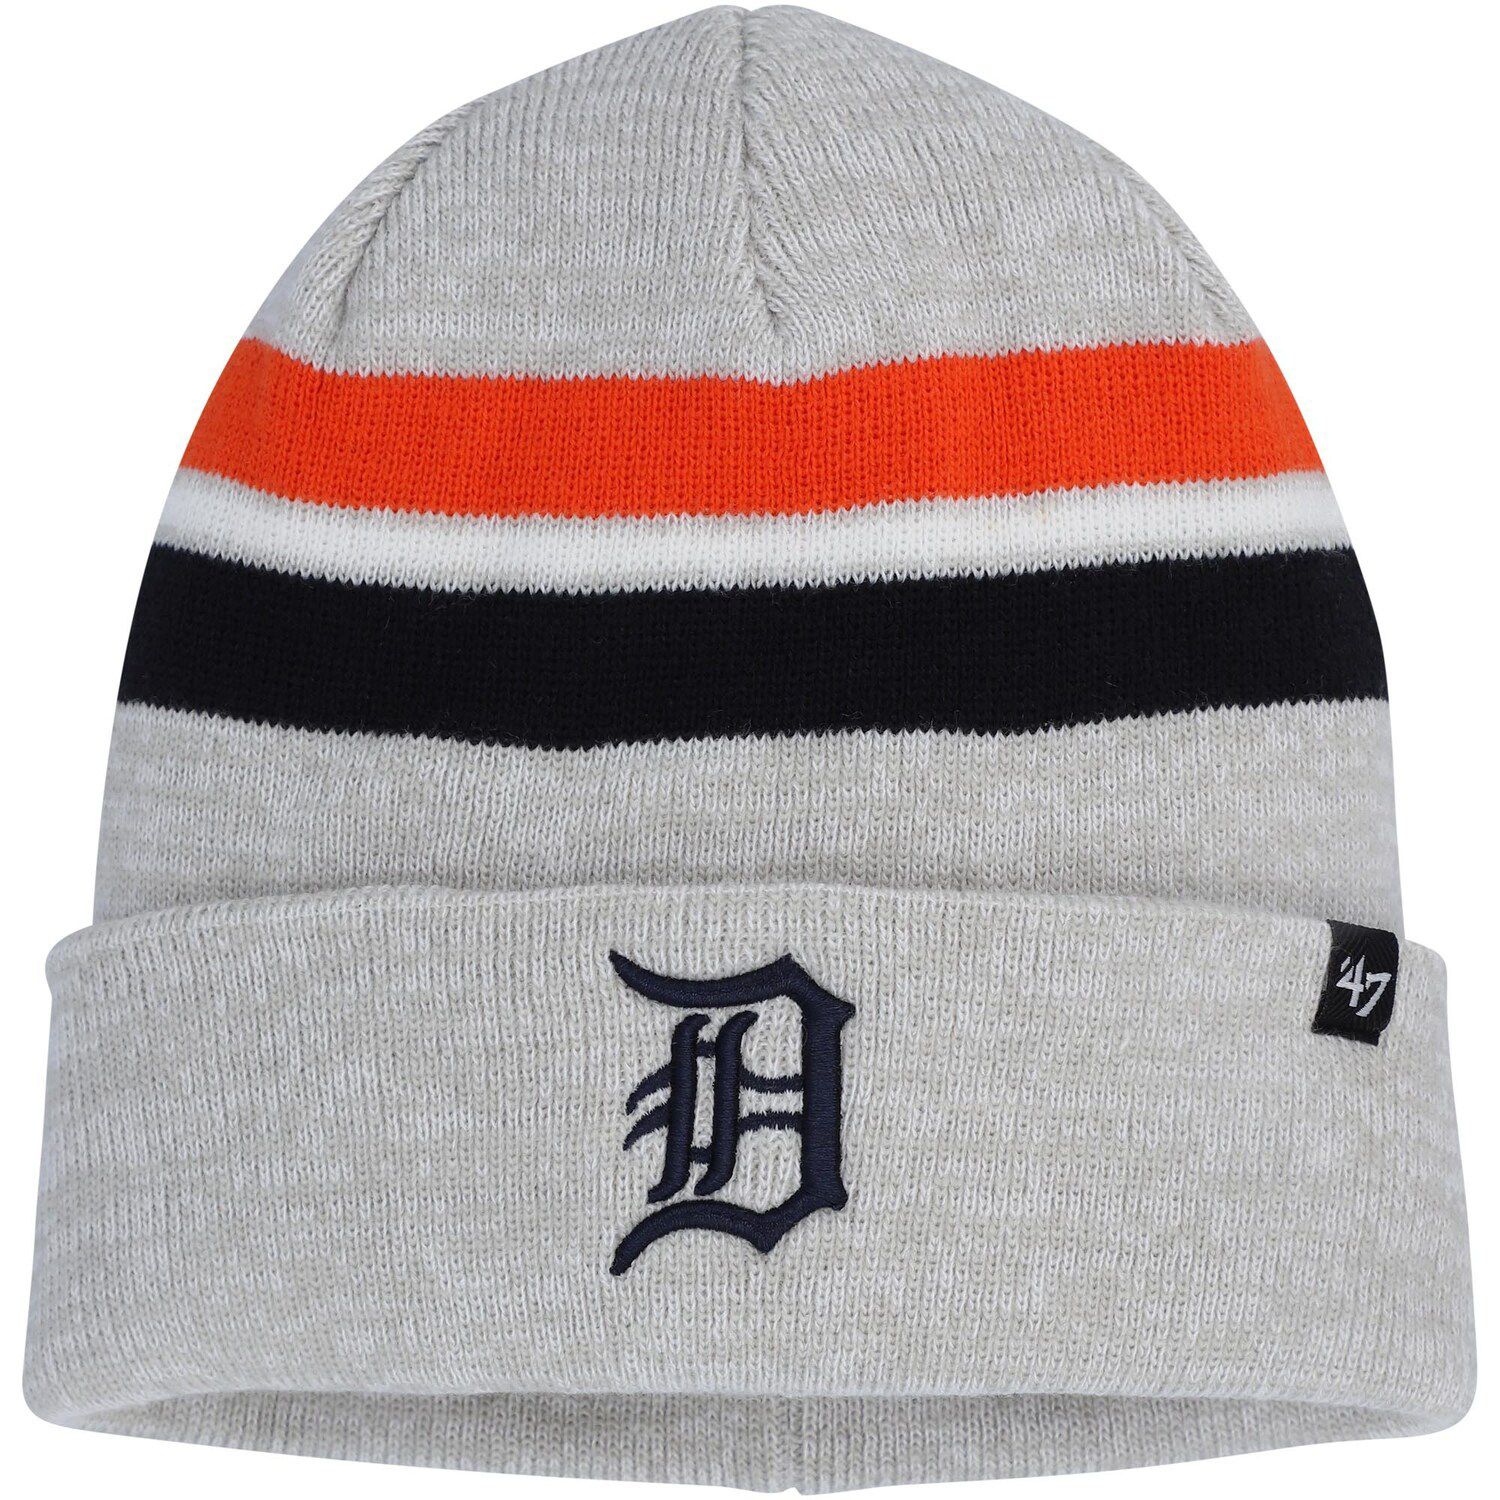 Image for Unbranded Men's '47 Gray Detroit Tigers Monhegan Cuffed Knit Hat at Kohl's.